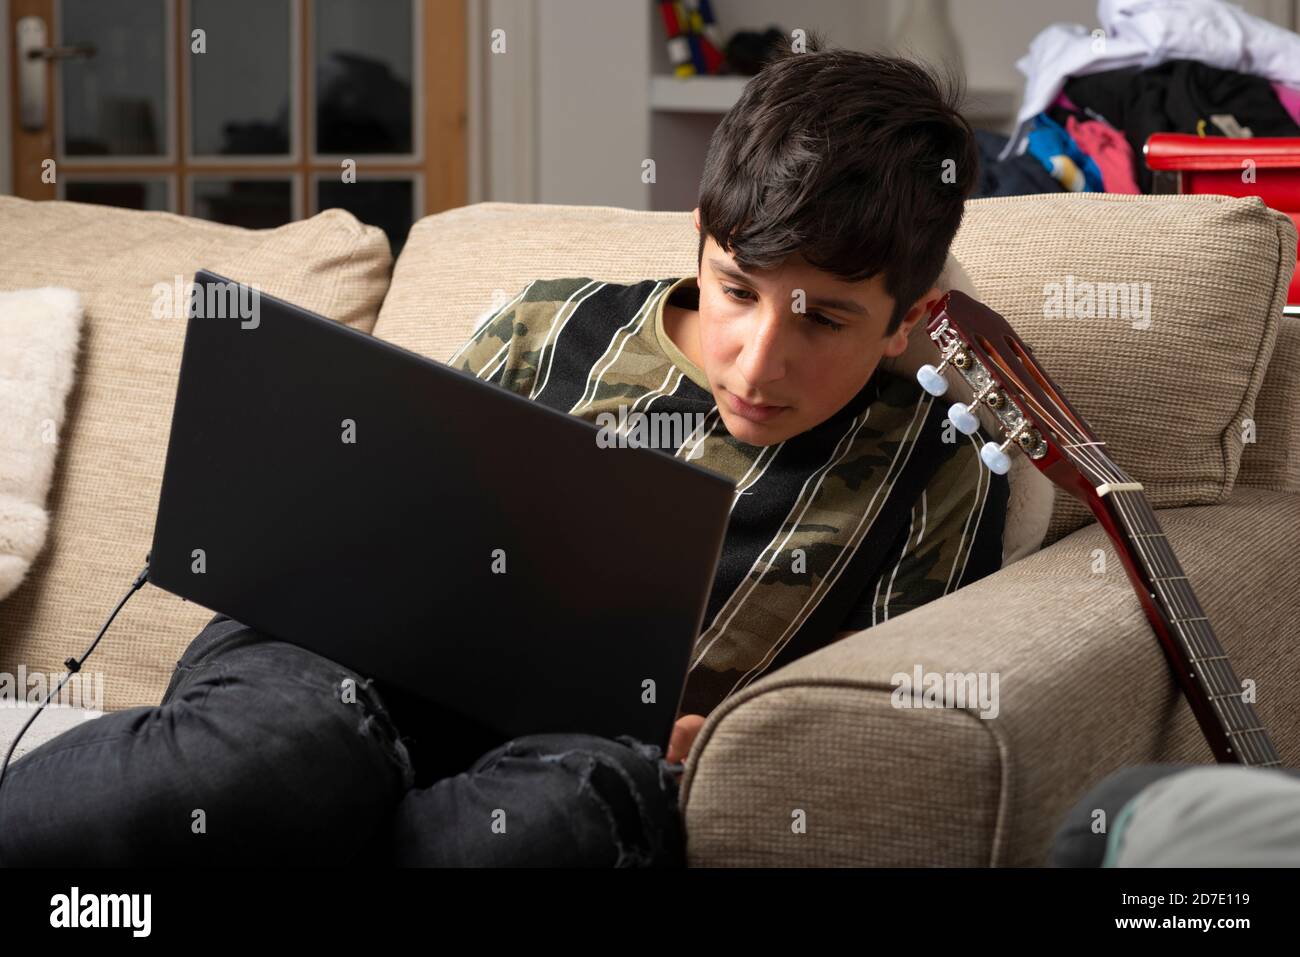 teenage boy, age 13-14 on his laptop at home Stock Photo